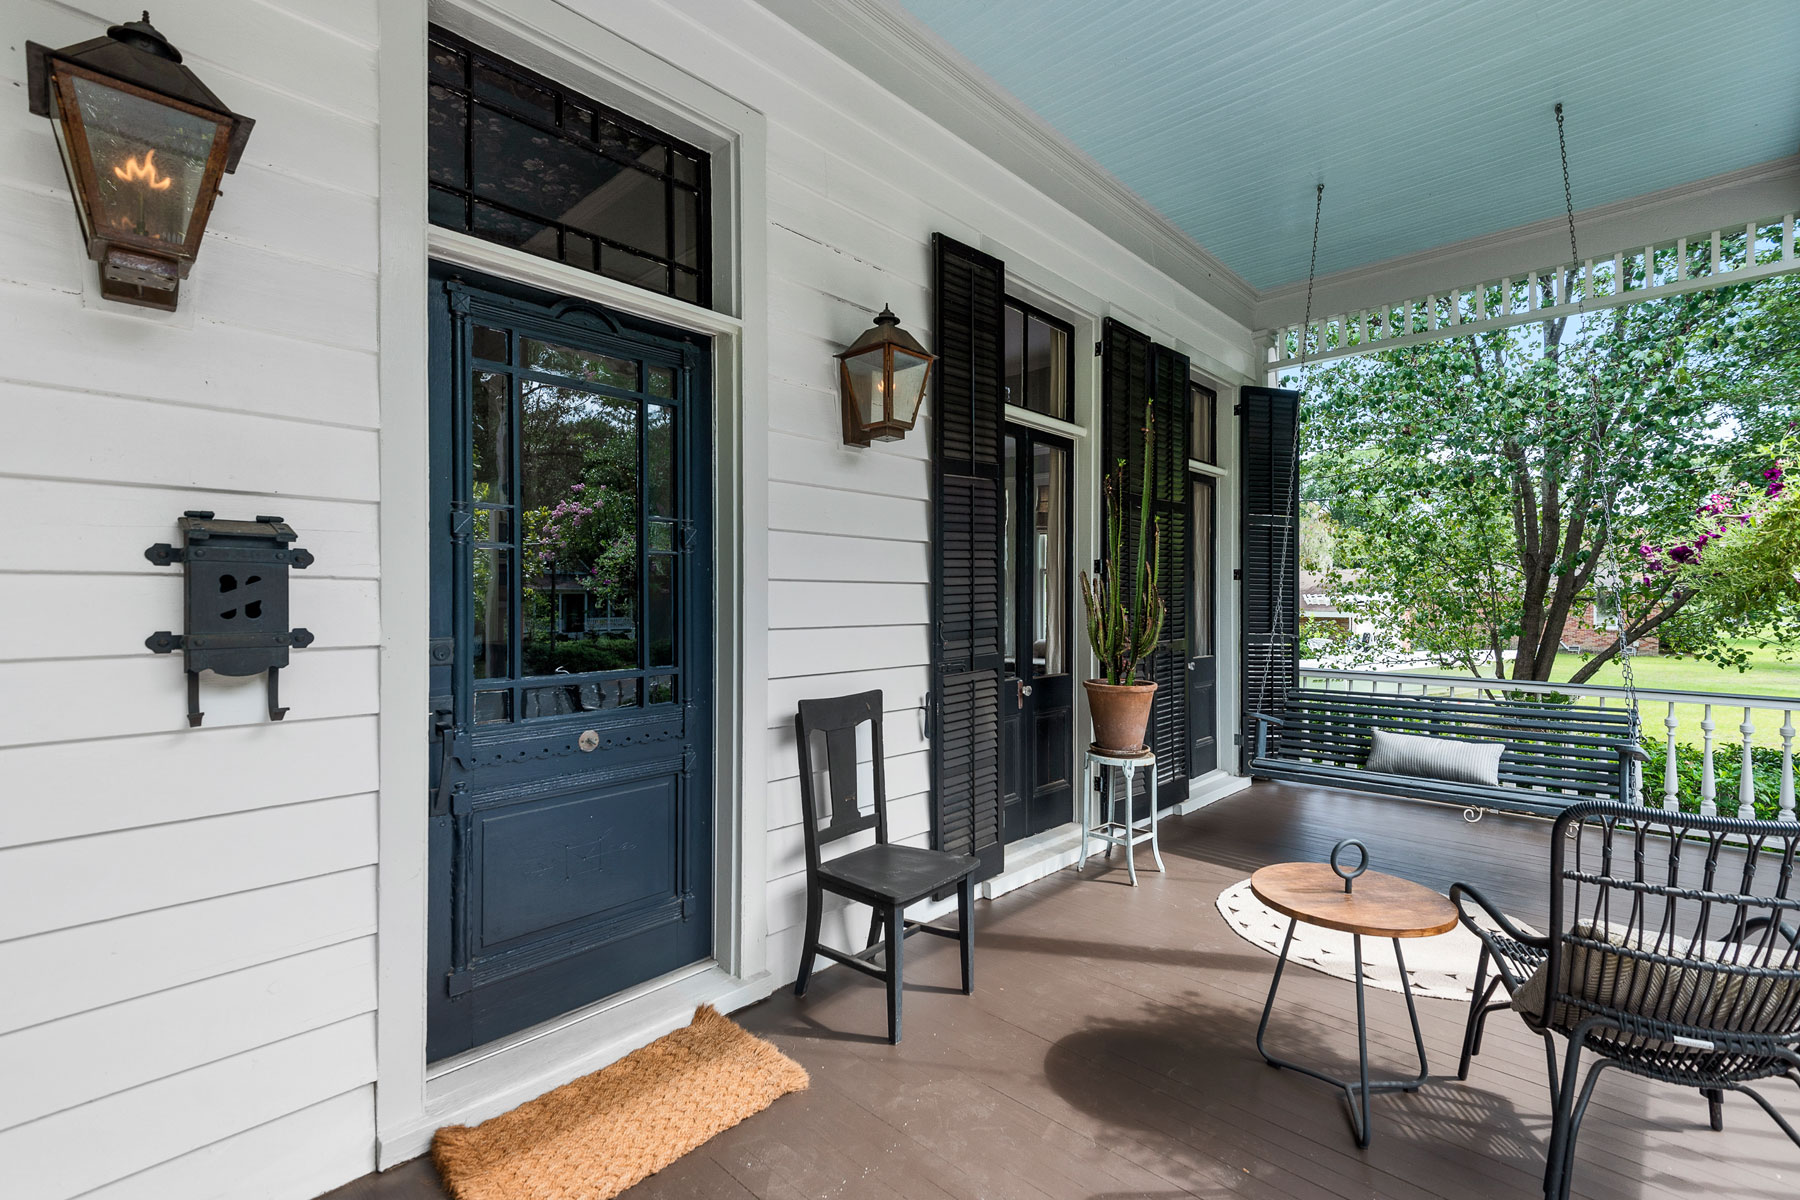 Front porch showing original frech doors opening to porch